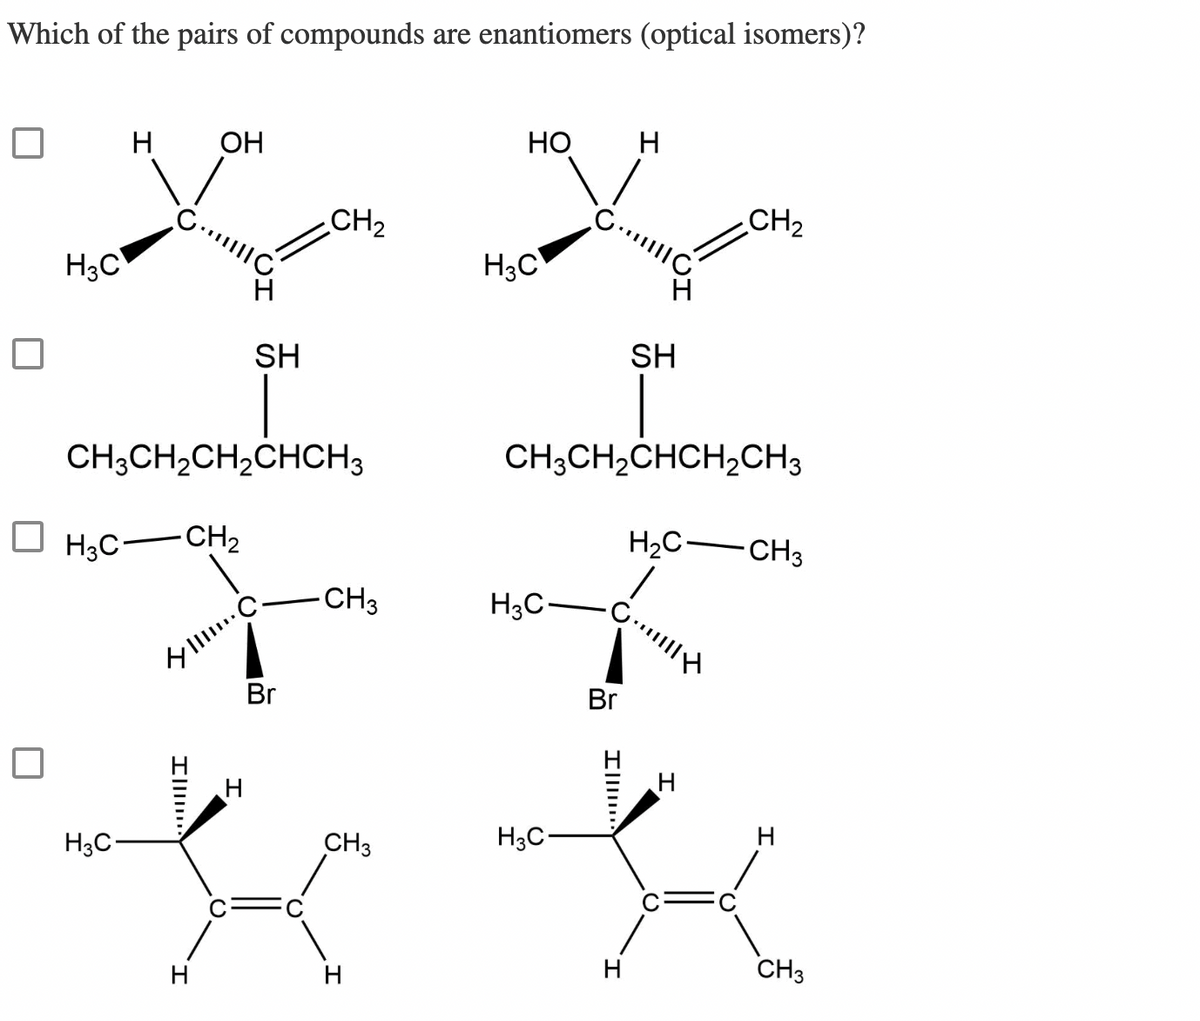 Which of the pairs of compounds are enantiomers (optical isomers)?
H3C
H OH
☐ H₂C-CH₂
CH3CH₂CH₂CHCH3
H3C
SH
III. C.
H
H
CH₂
Br
-CH3
HO
H3C
H3C-
H
Br
SH
CH3CH₂CHCH₂CH3
H₂C-
G||||
CH3
H3C-
**
H
CH₂
H
CH3
H
CH3